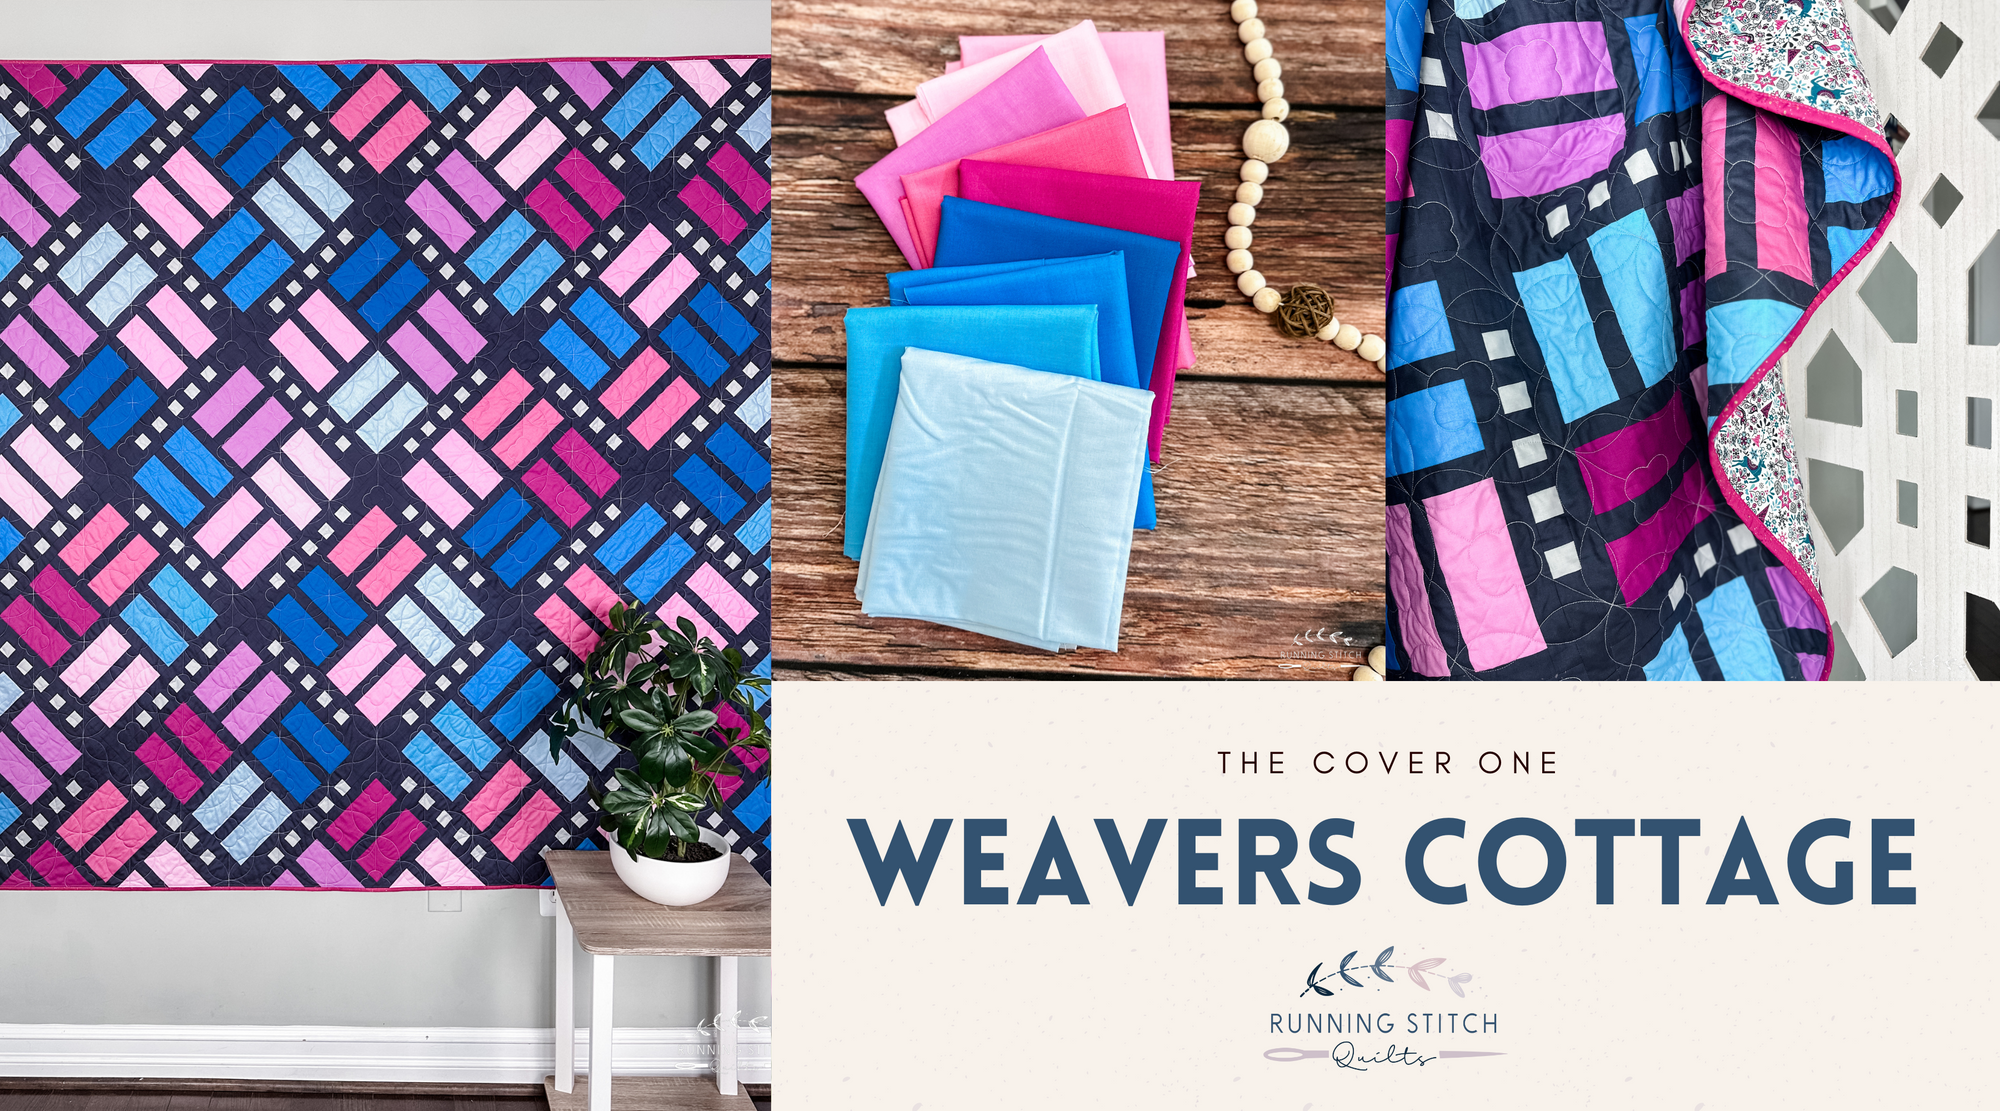 Weavers Cottage - The Cover One